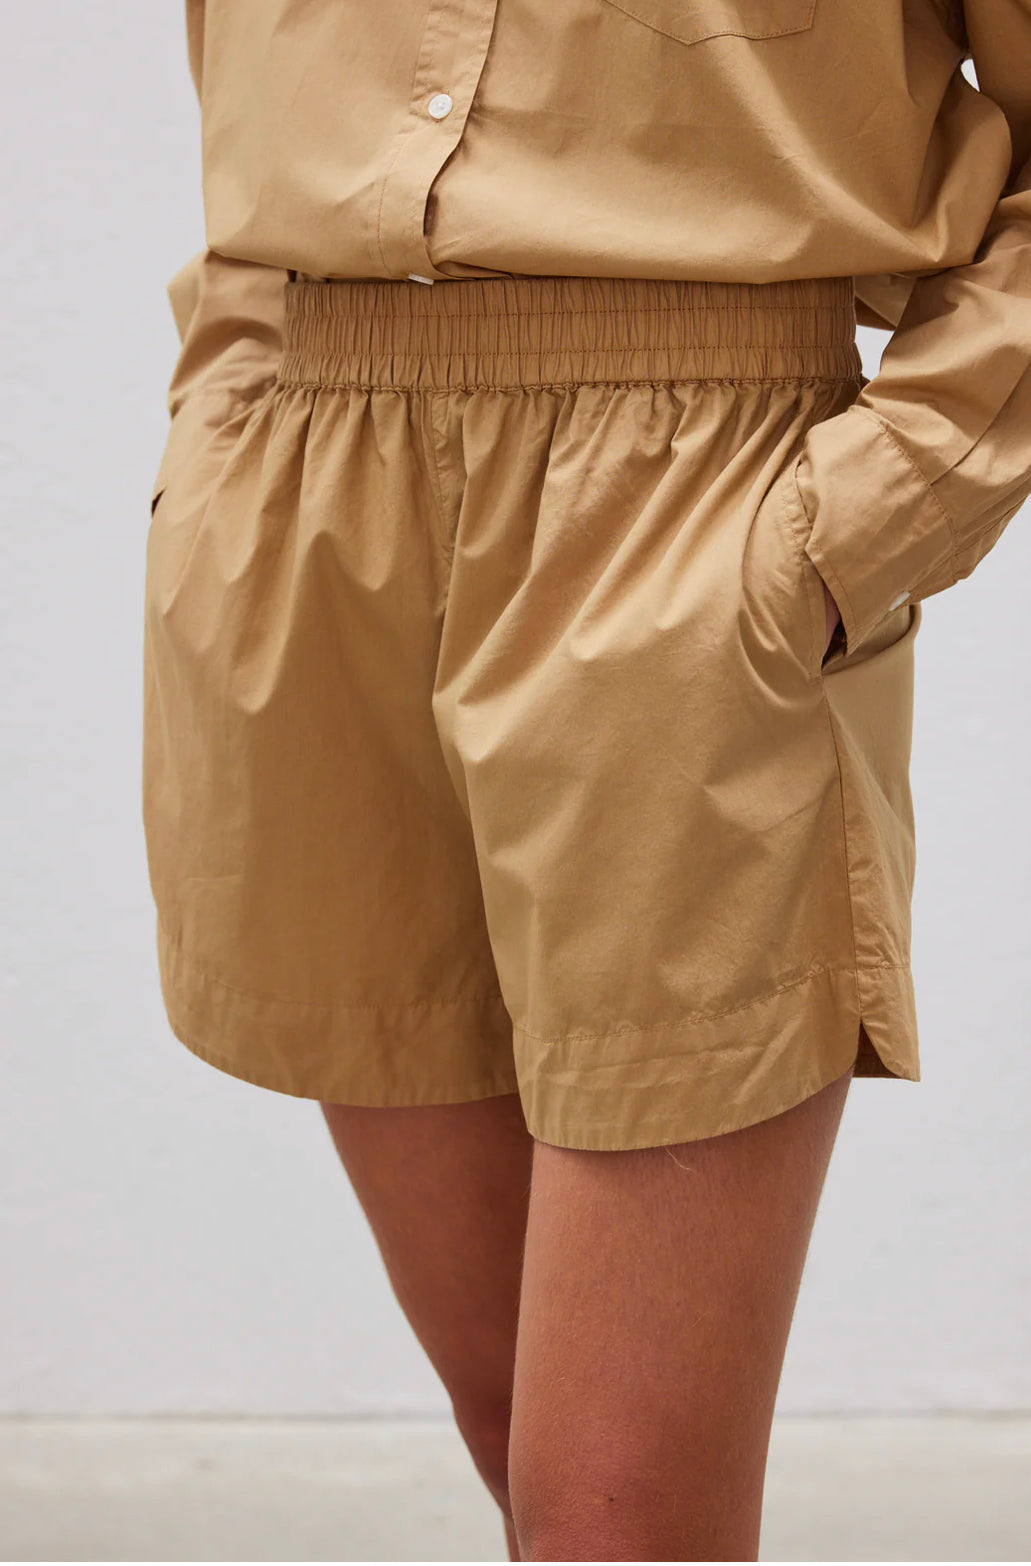 The Chiara Short in Toffee by LMND